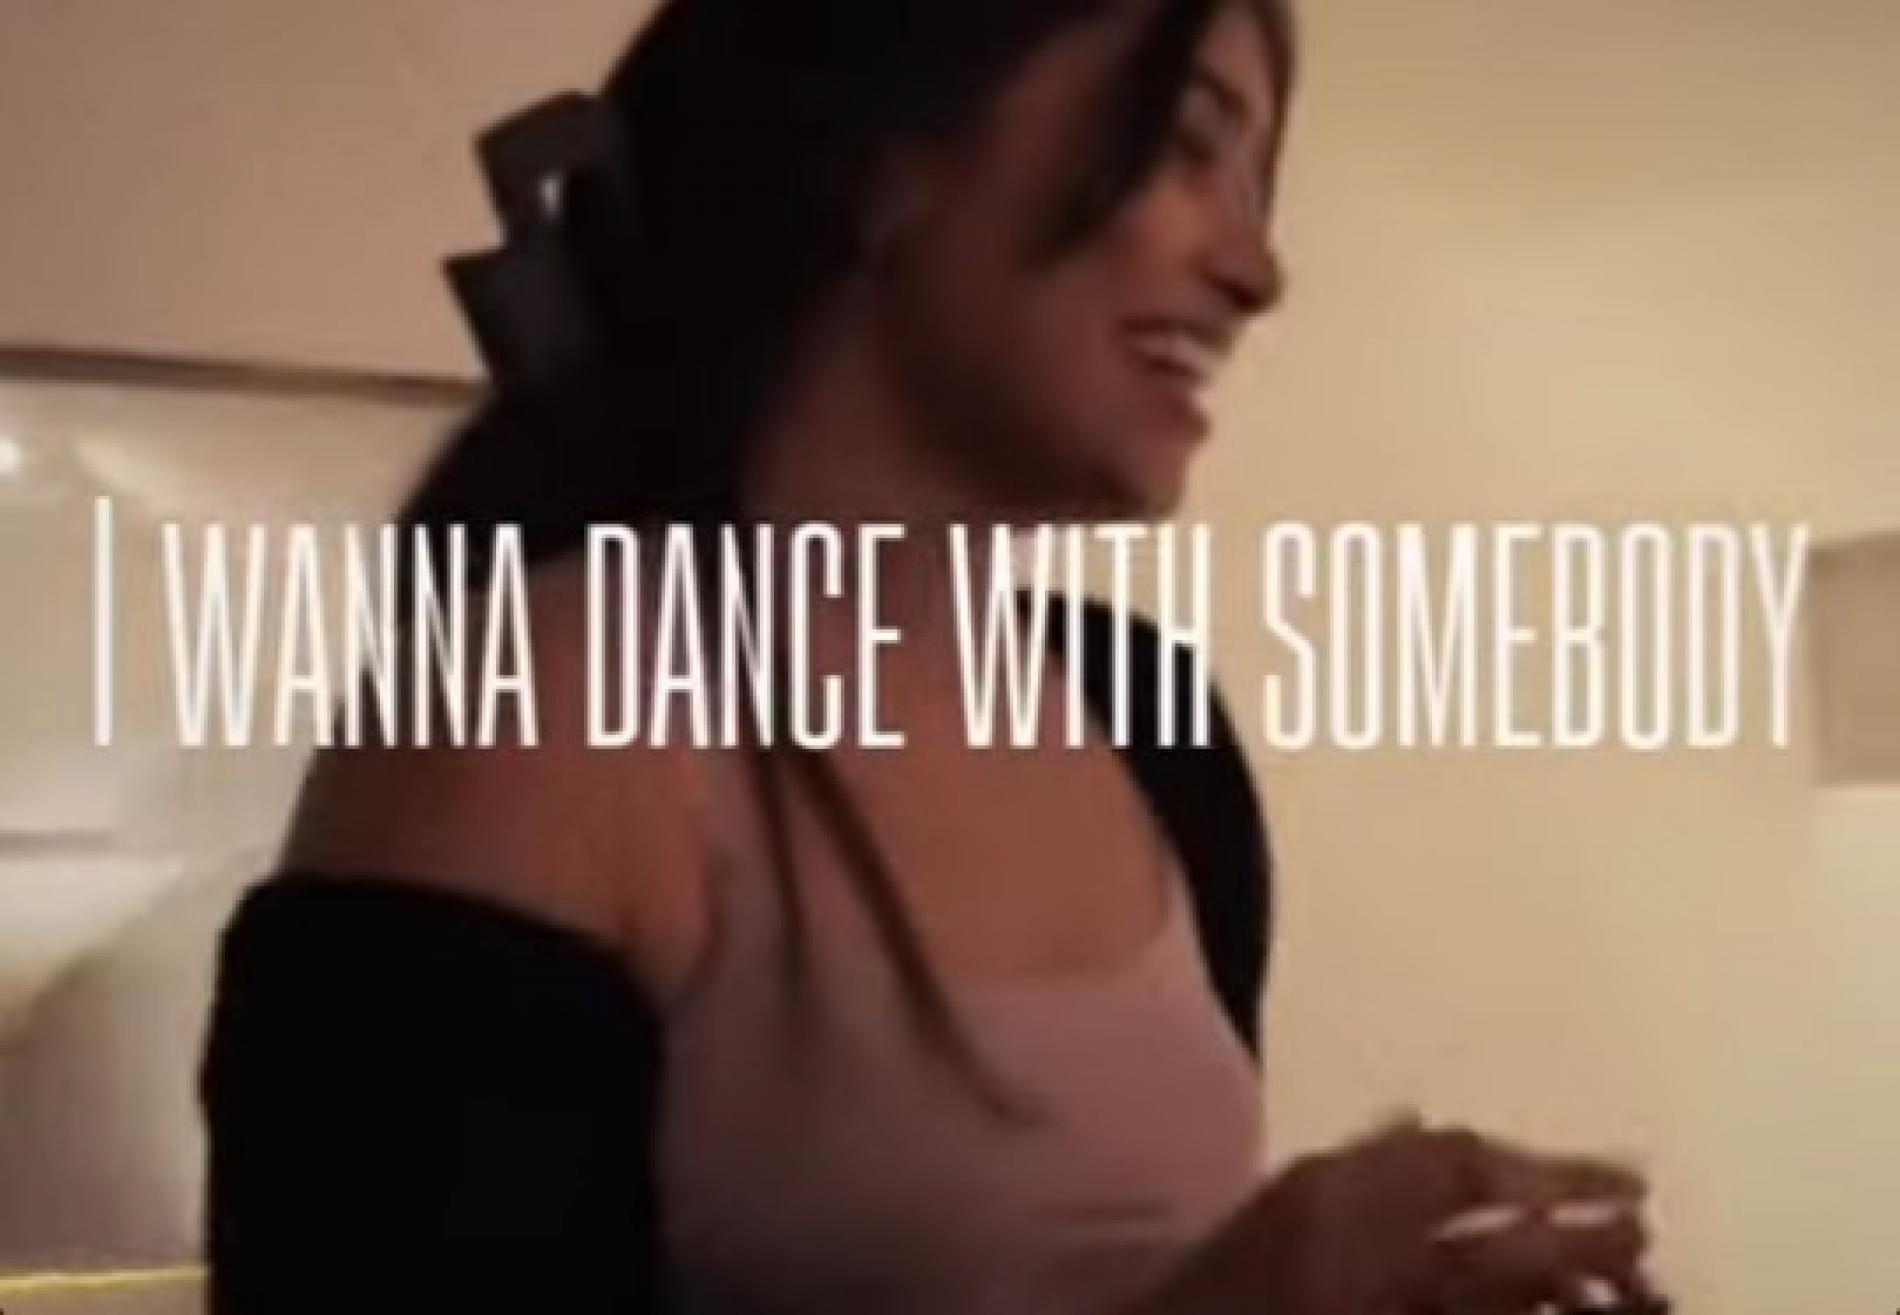 New Music : Ama – Wanna Dance With Somebody (Cover) – Whitney Houston